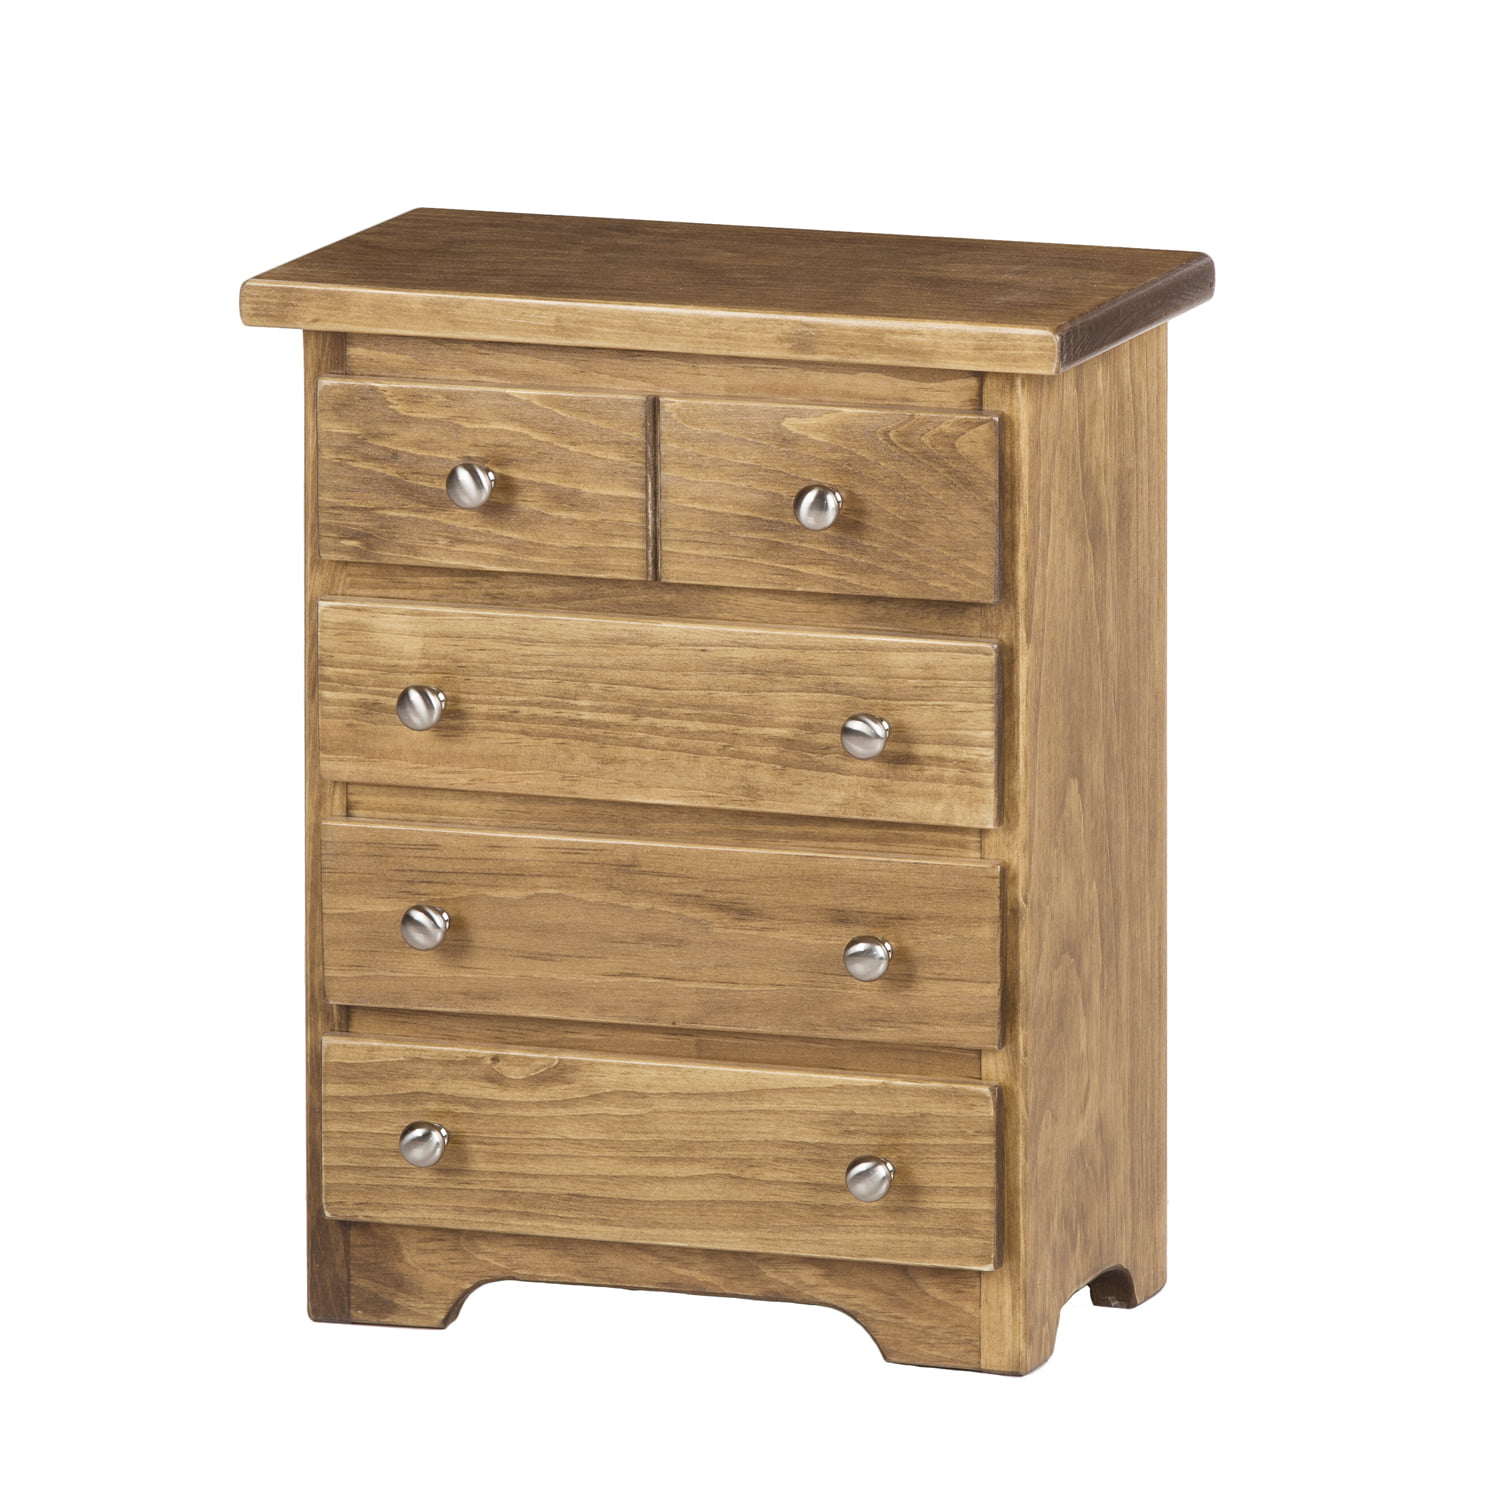 Child Size Chest of Drawers for Dolls